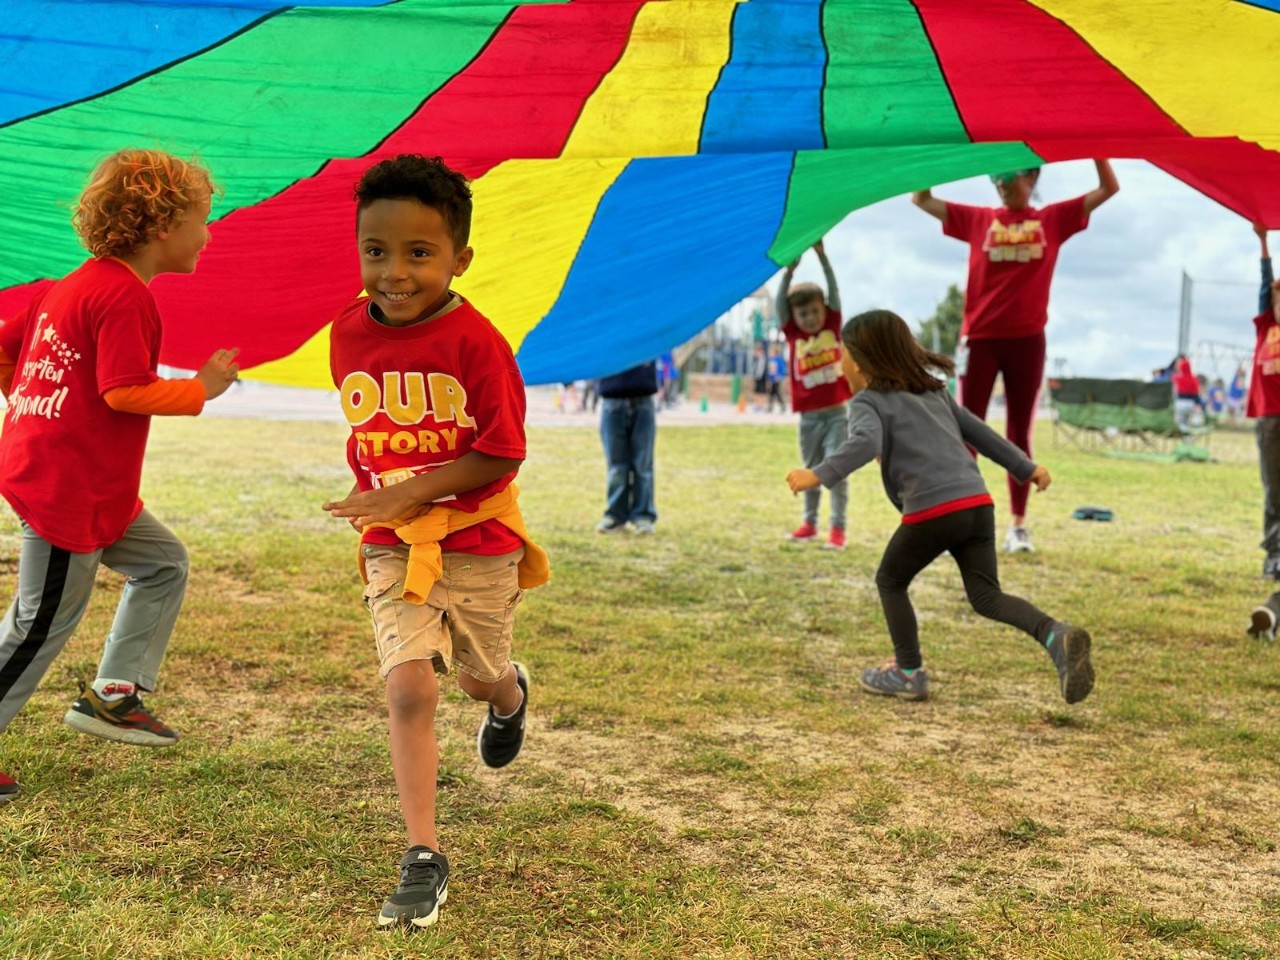 A student runs under a colorful parachute during recess.